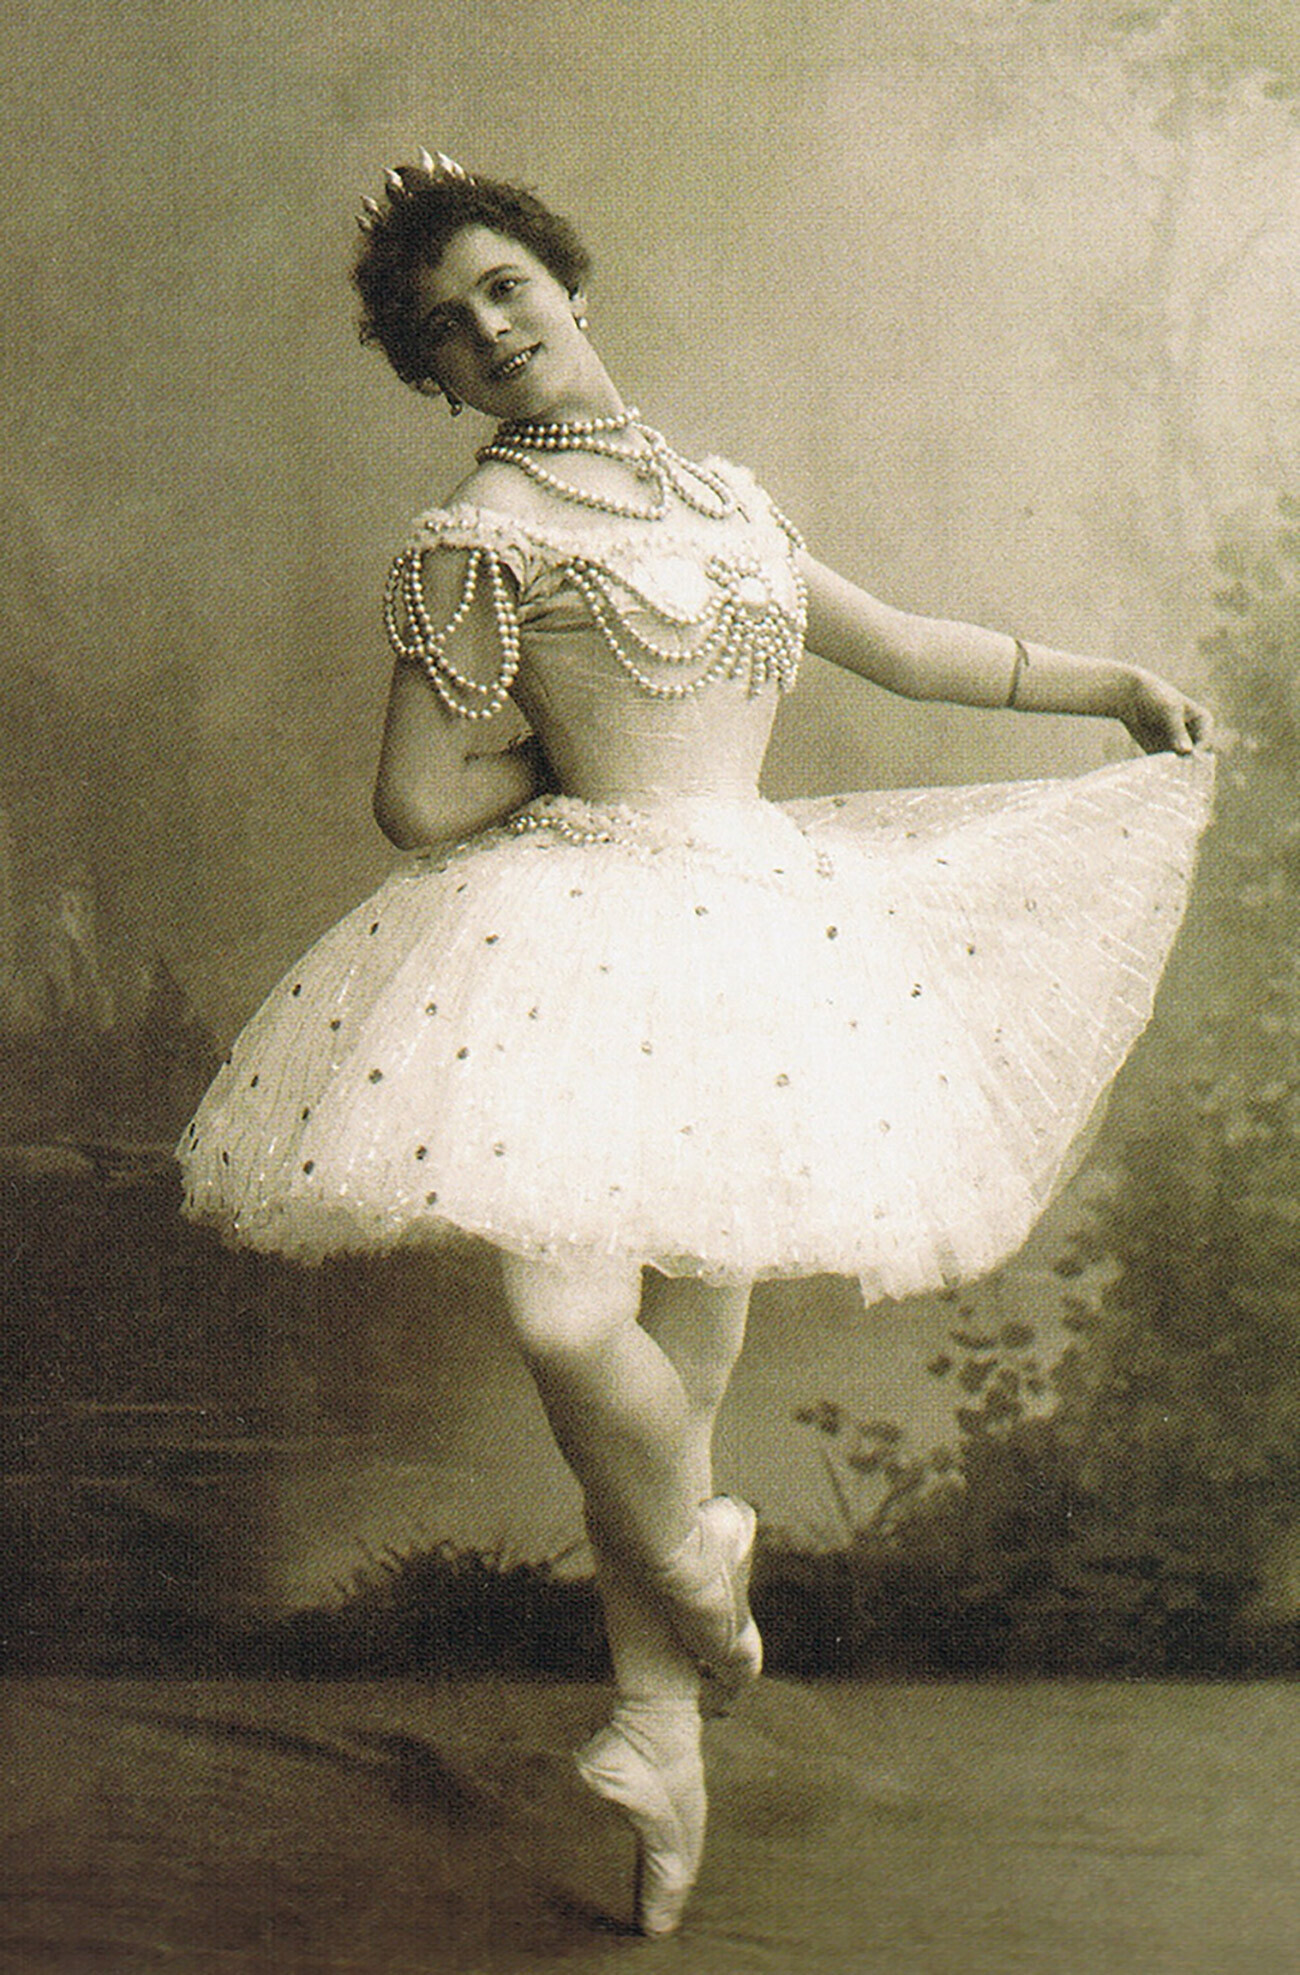 Pierina Legnani in the title role for Petipa’s staging
